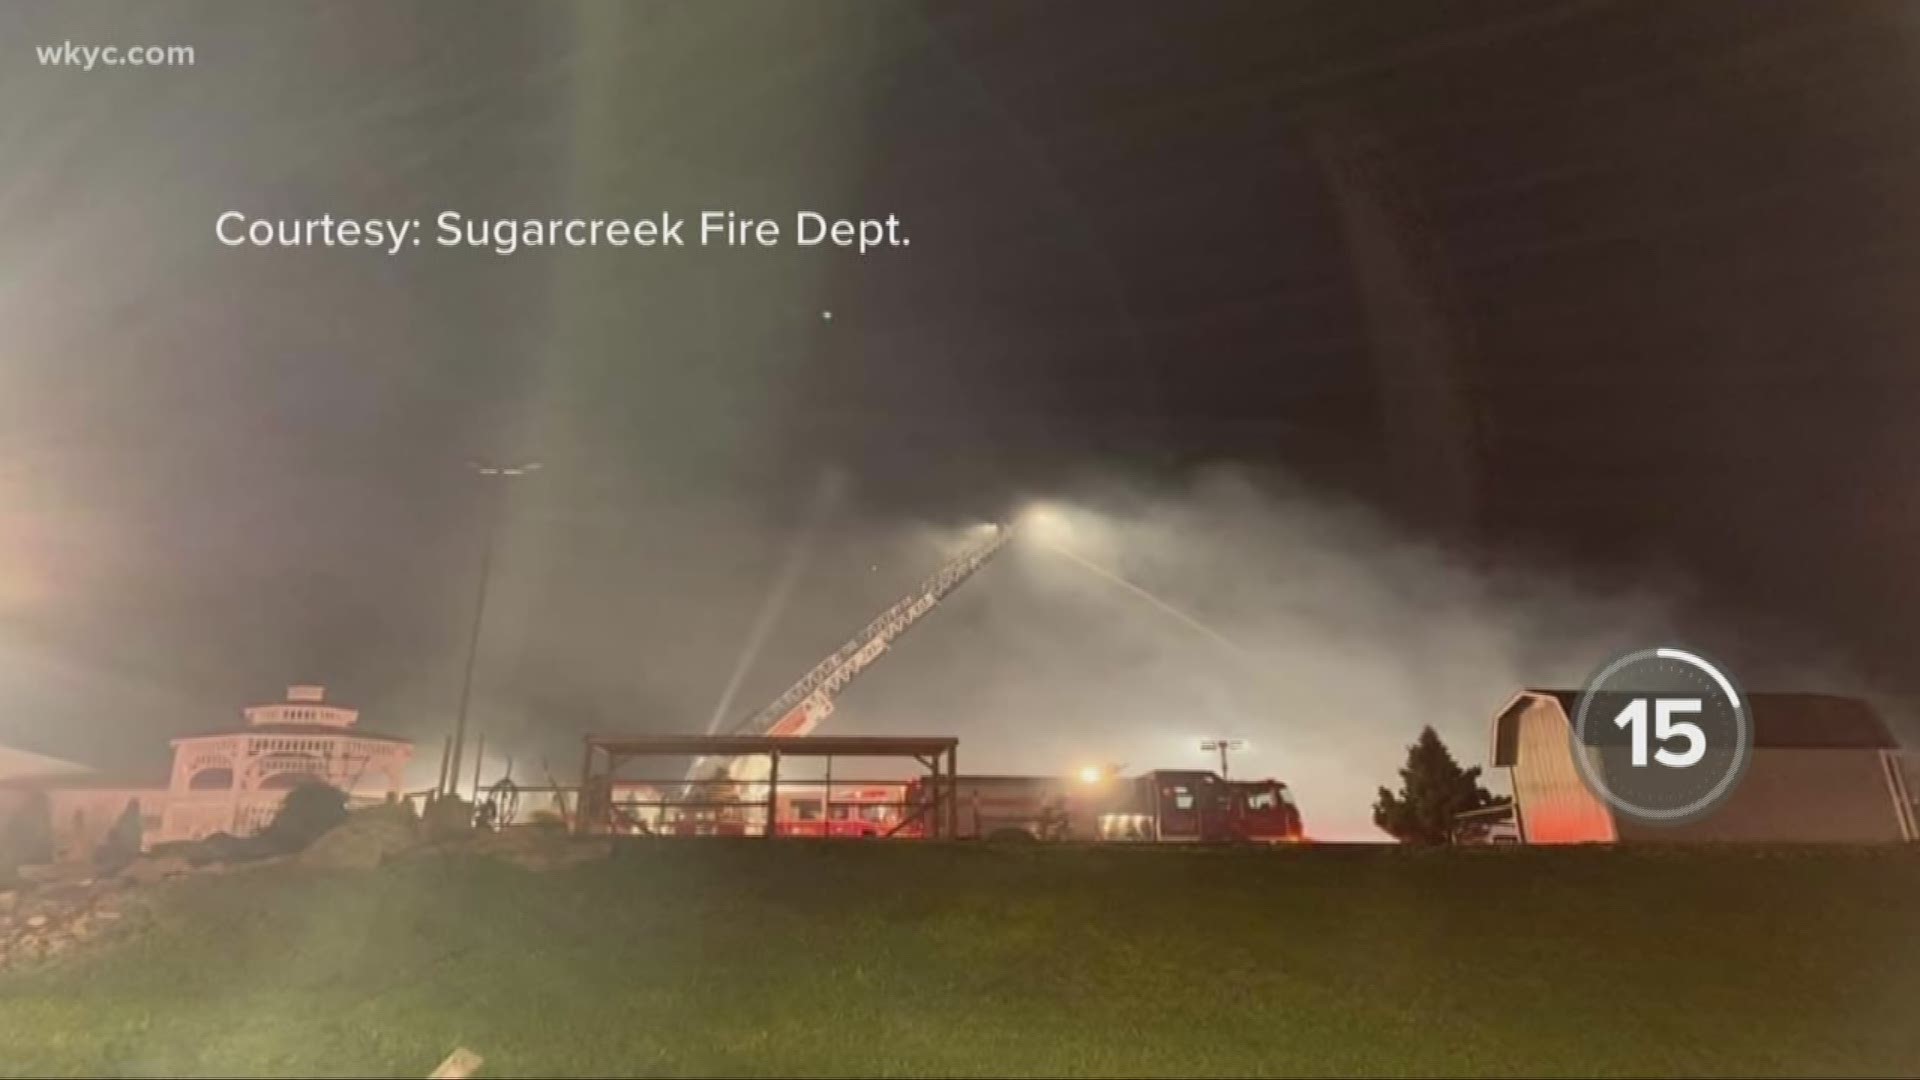 The fire that tore through Walnut Creek Amish Flea Market last week in Tuscarawas County was caused by a lightning strike, the Ohio Department of Commerce confirmed to WKYC Thursday.